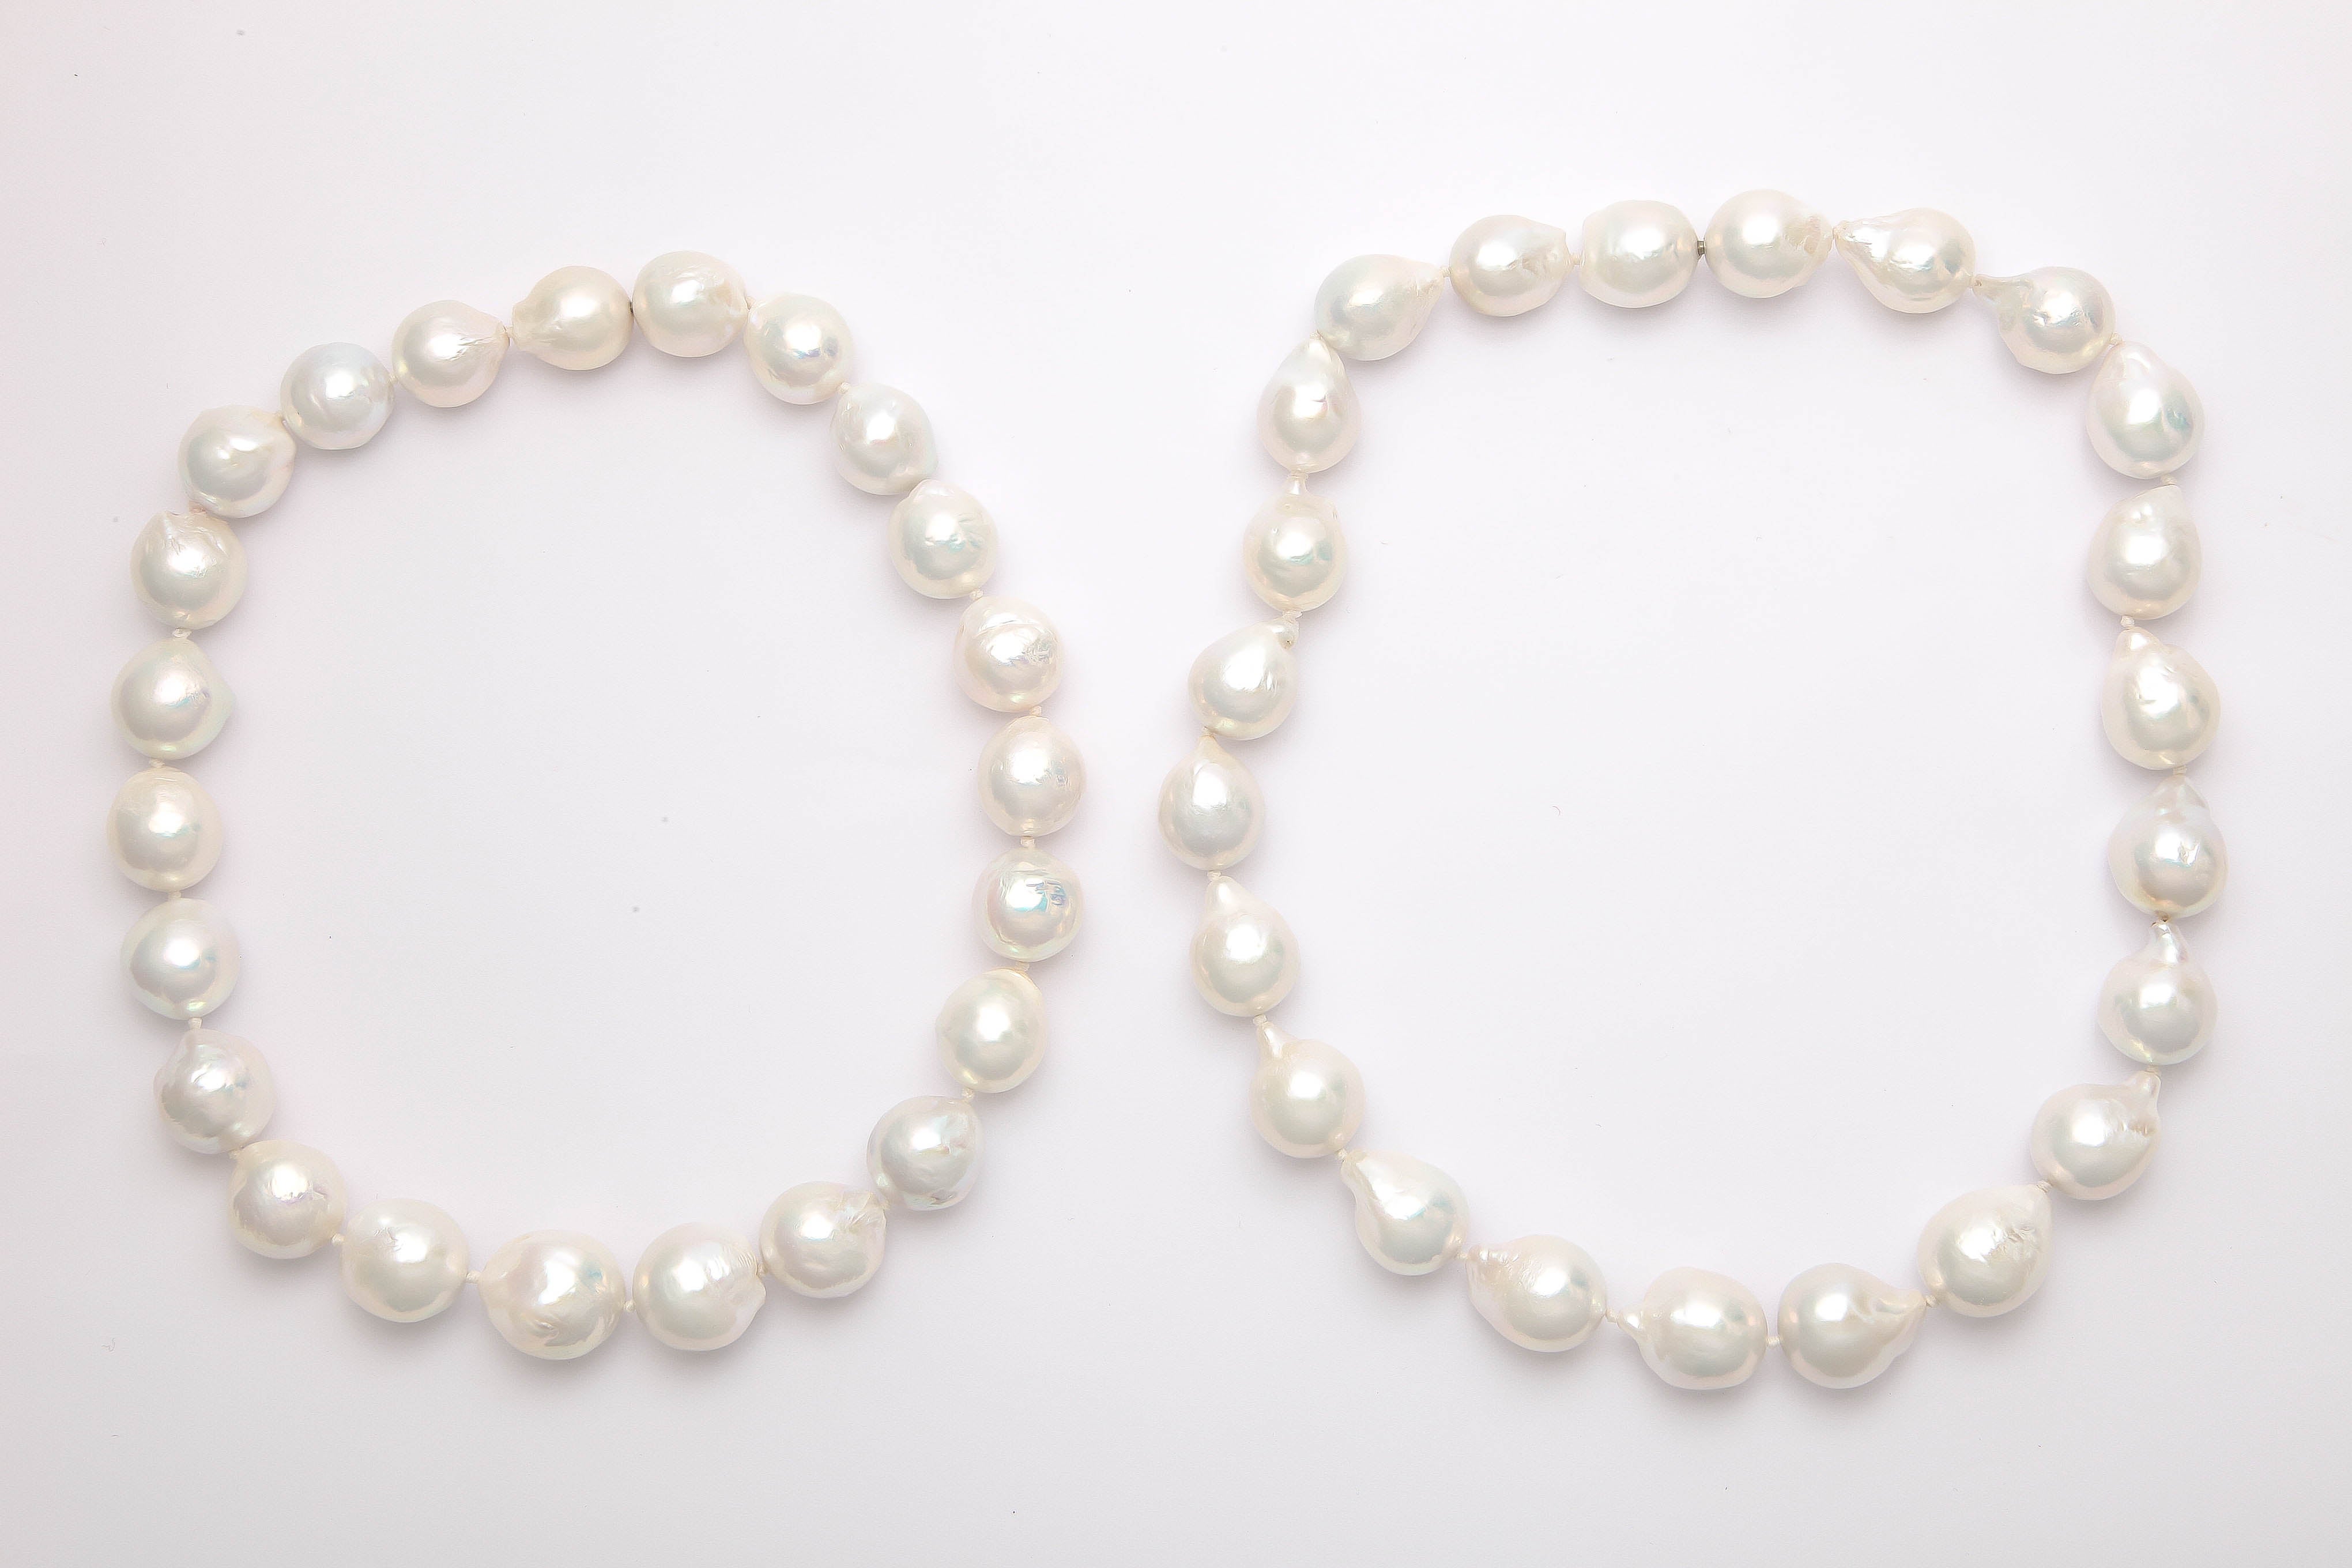 These very high luster pearls have 2 mystery clasps to connect them into 1 long strand or they can nest together as 16.5